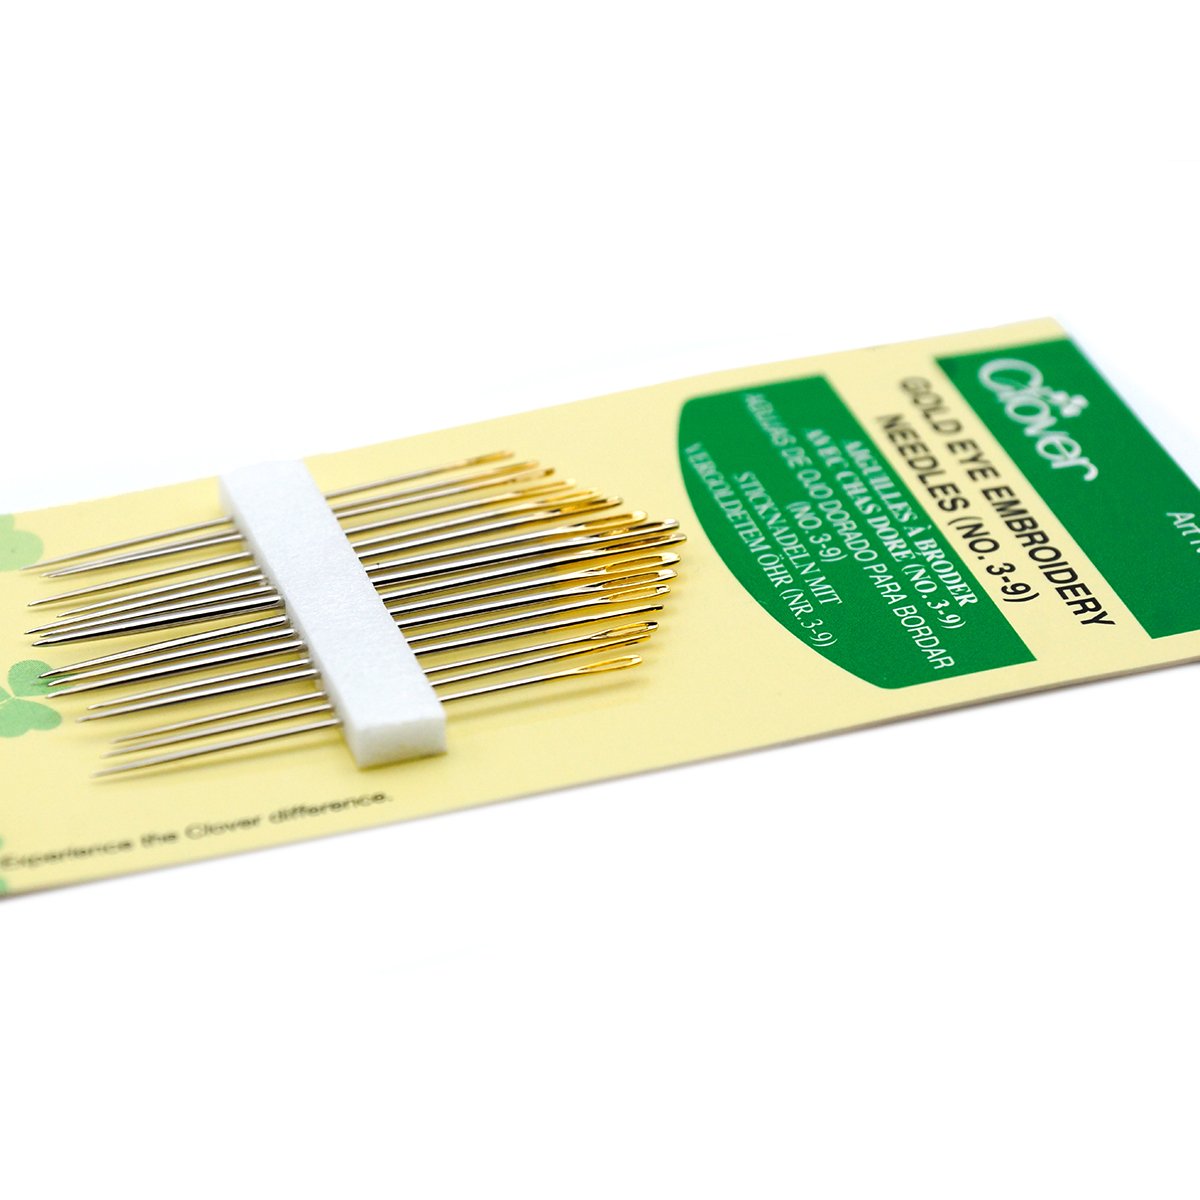 Clover Size 3-9 Gold Eye Embroidery Needles, Clover #235